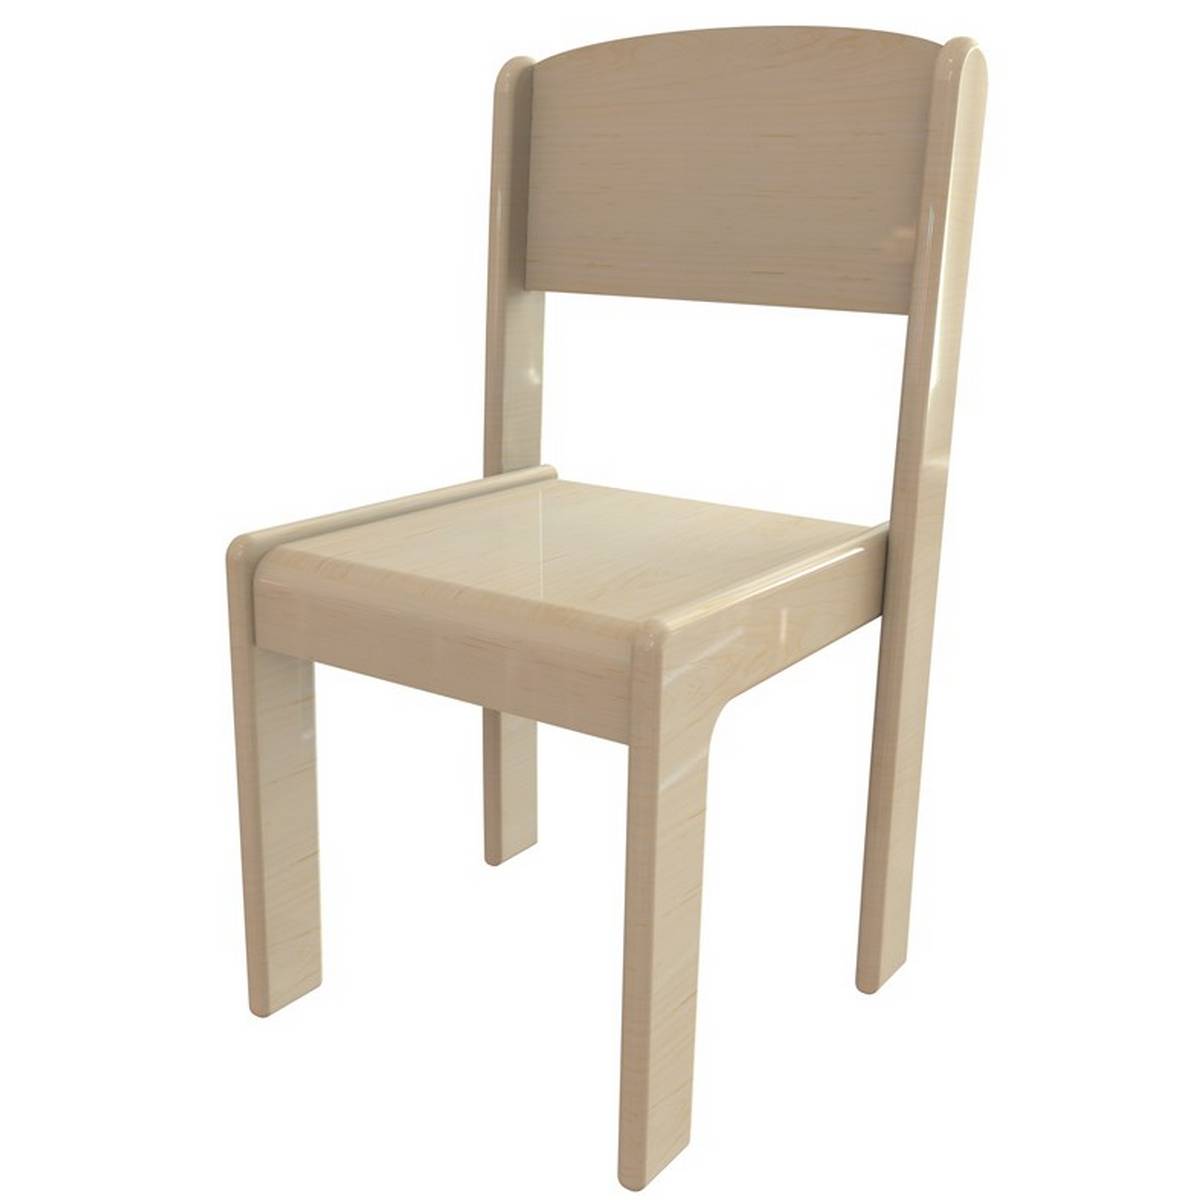 Beech Stacking Chair Pack of 4